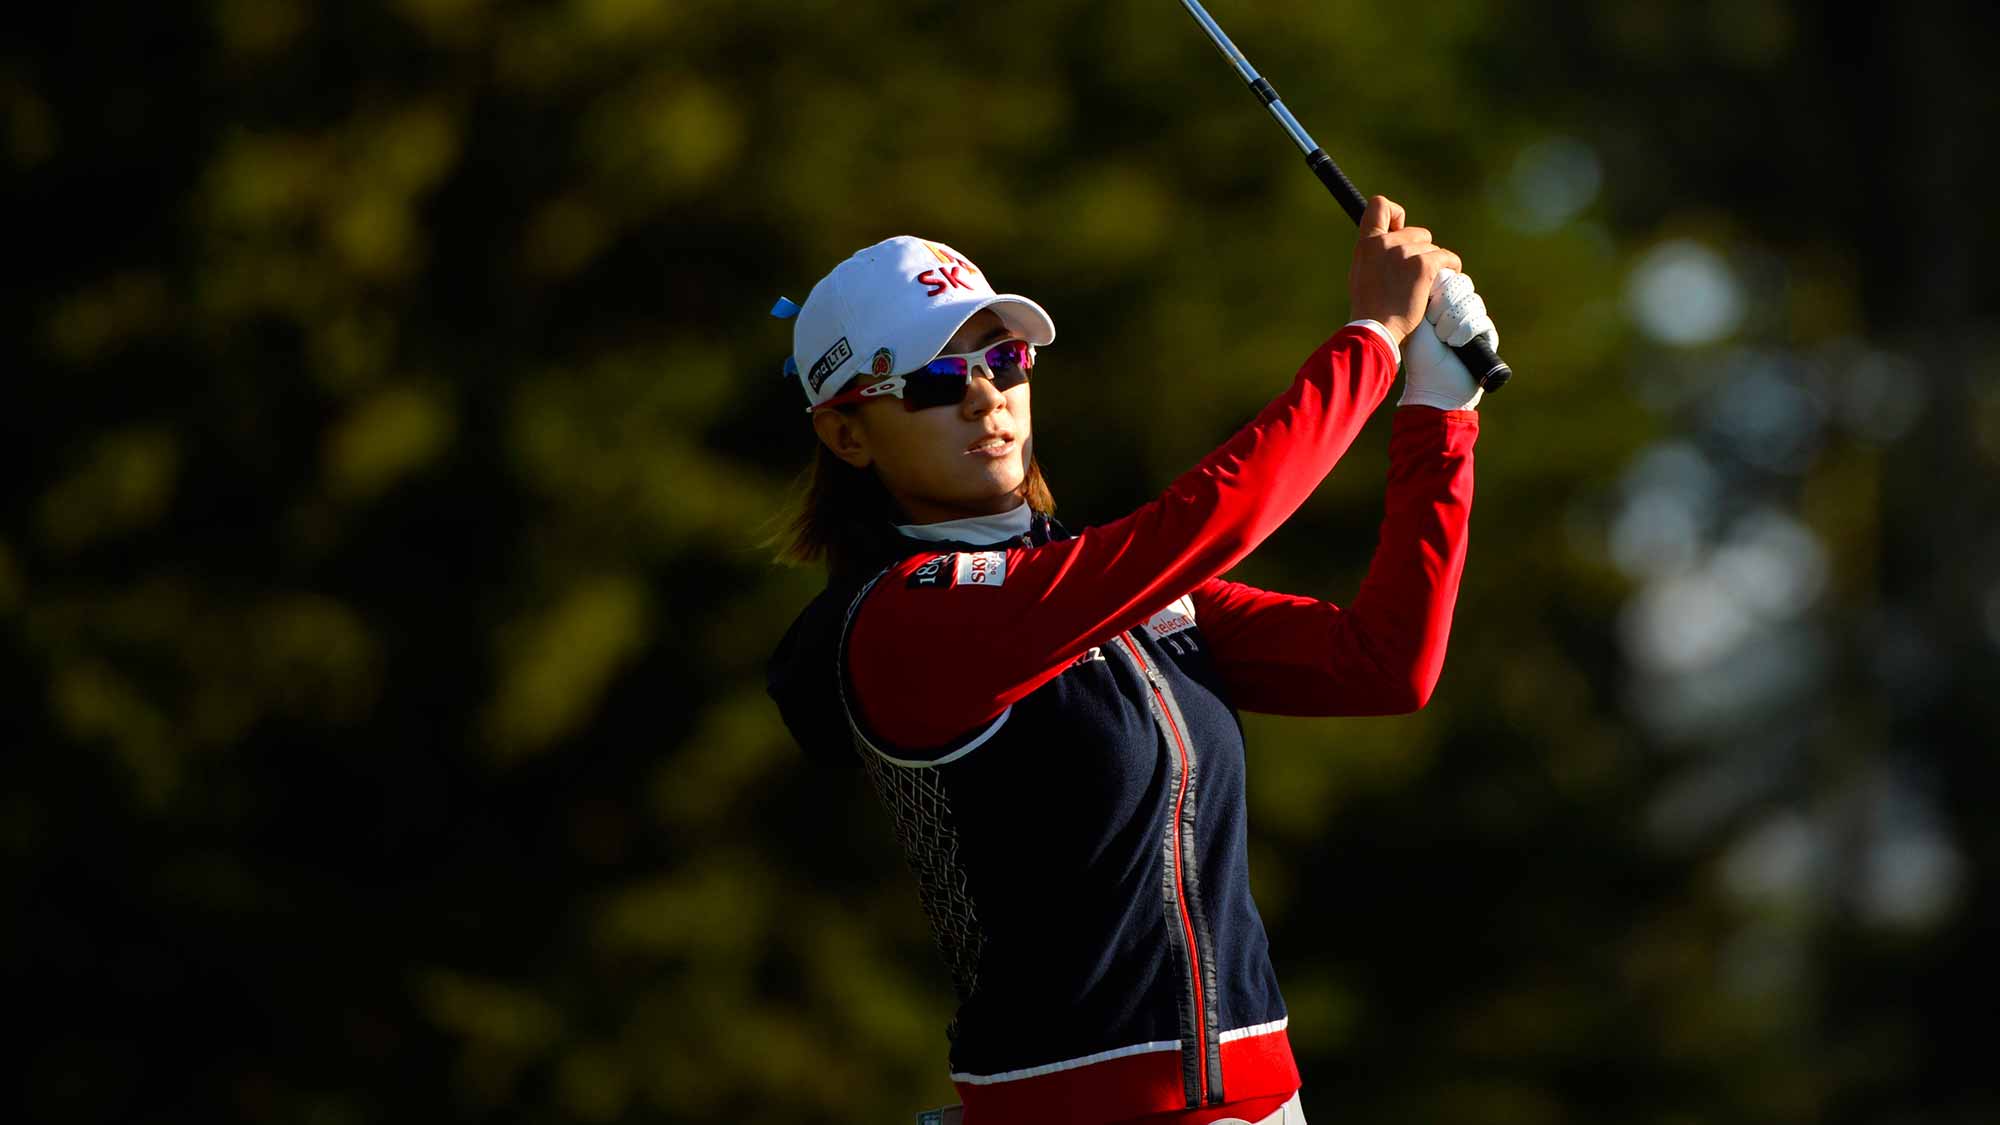 Na Yeon Choi of South Korea makes an approach shot on the 16th hole during round three of the Swinging Skirts LPGA Classic presented by CTBC at the Lake Merced Golf Club